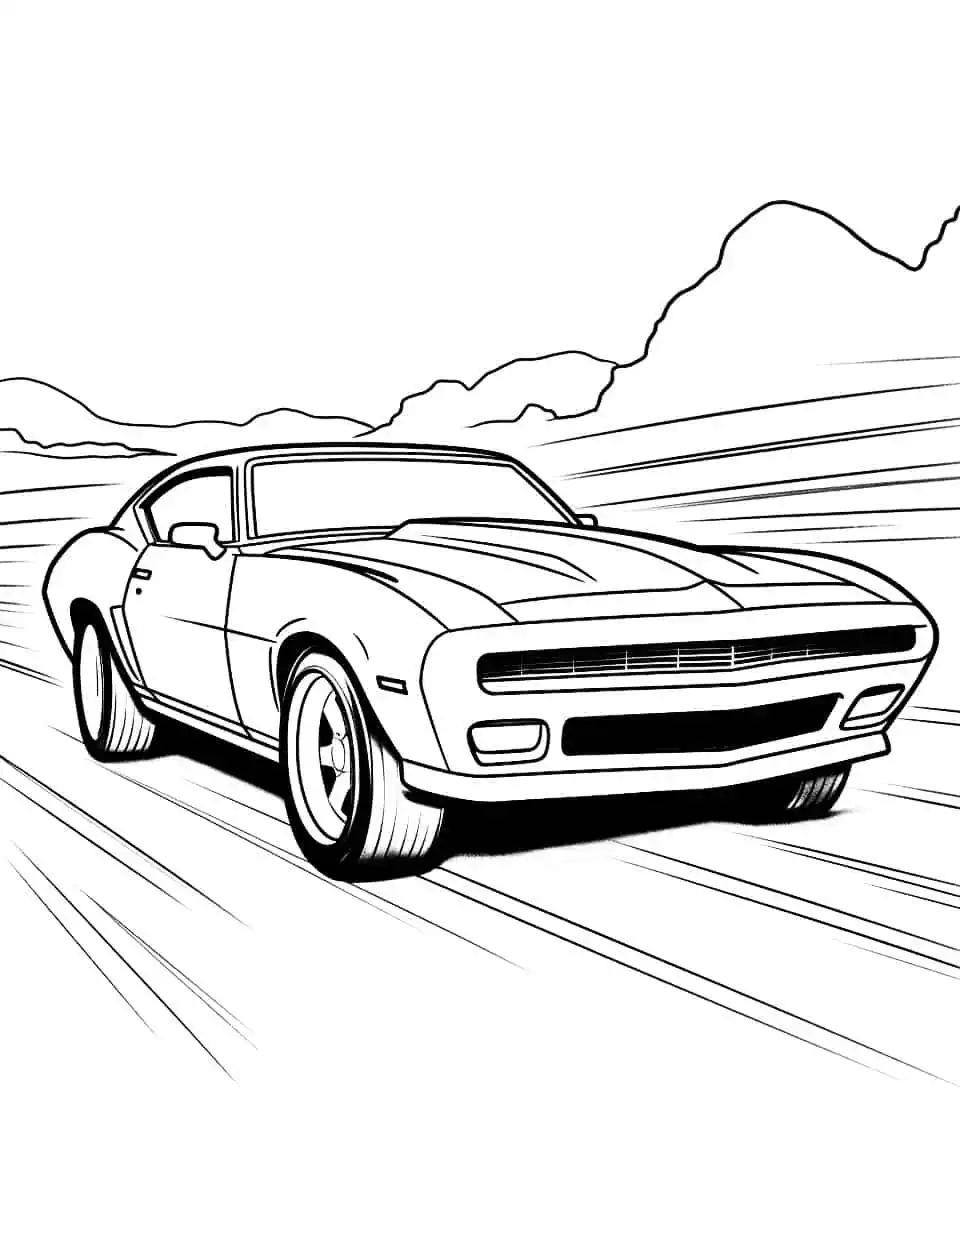 The Cool Camaro Car Coloring Page - A fun Camaro racing down a highway – perfect for kids who love speed.